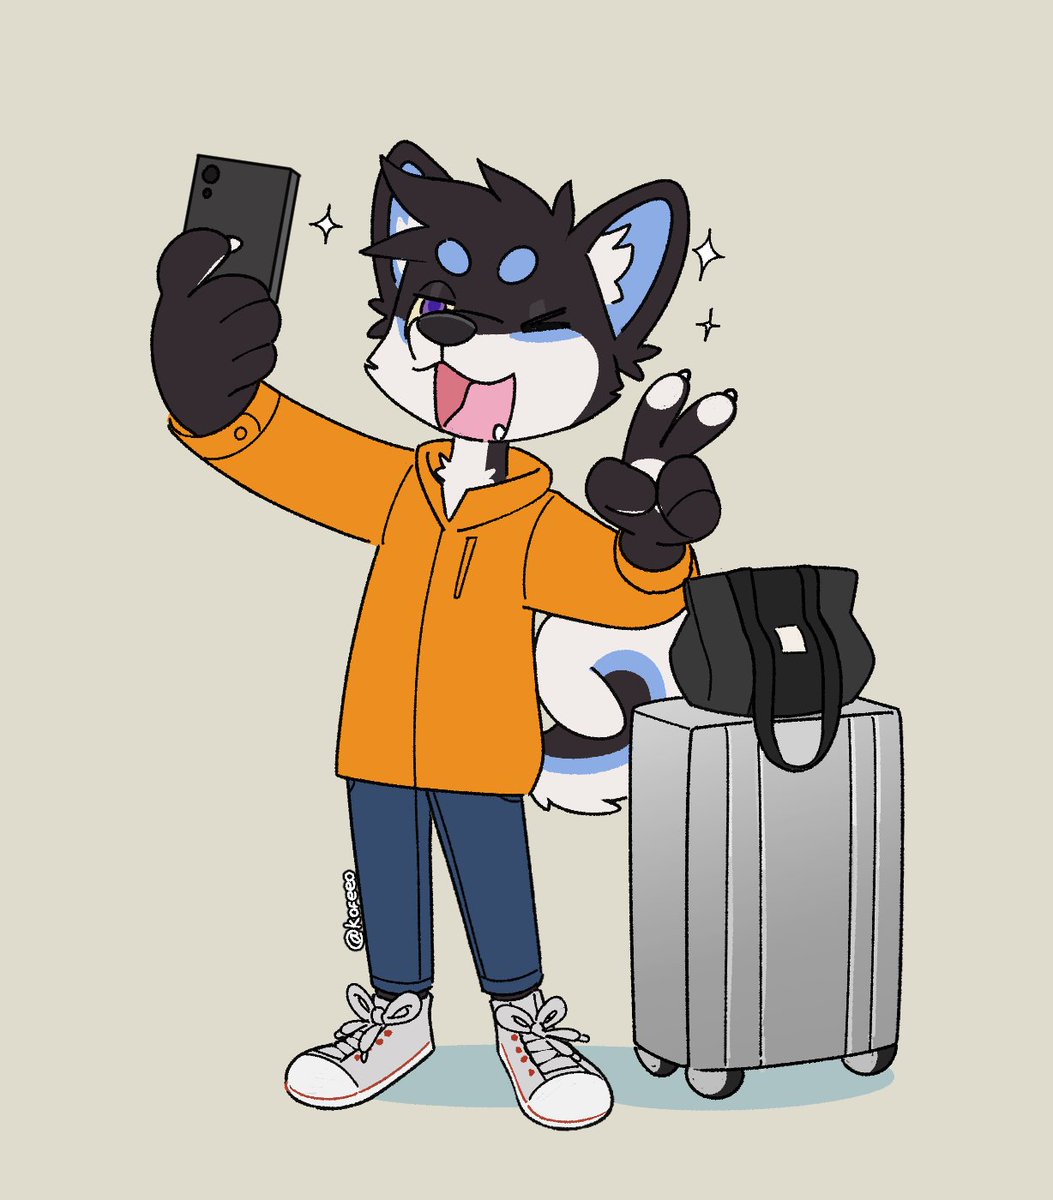 「Just stepped out of the airport! Doodle 」|Kofeeo | OPENのイラスト